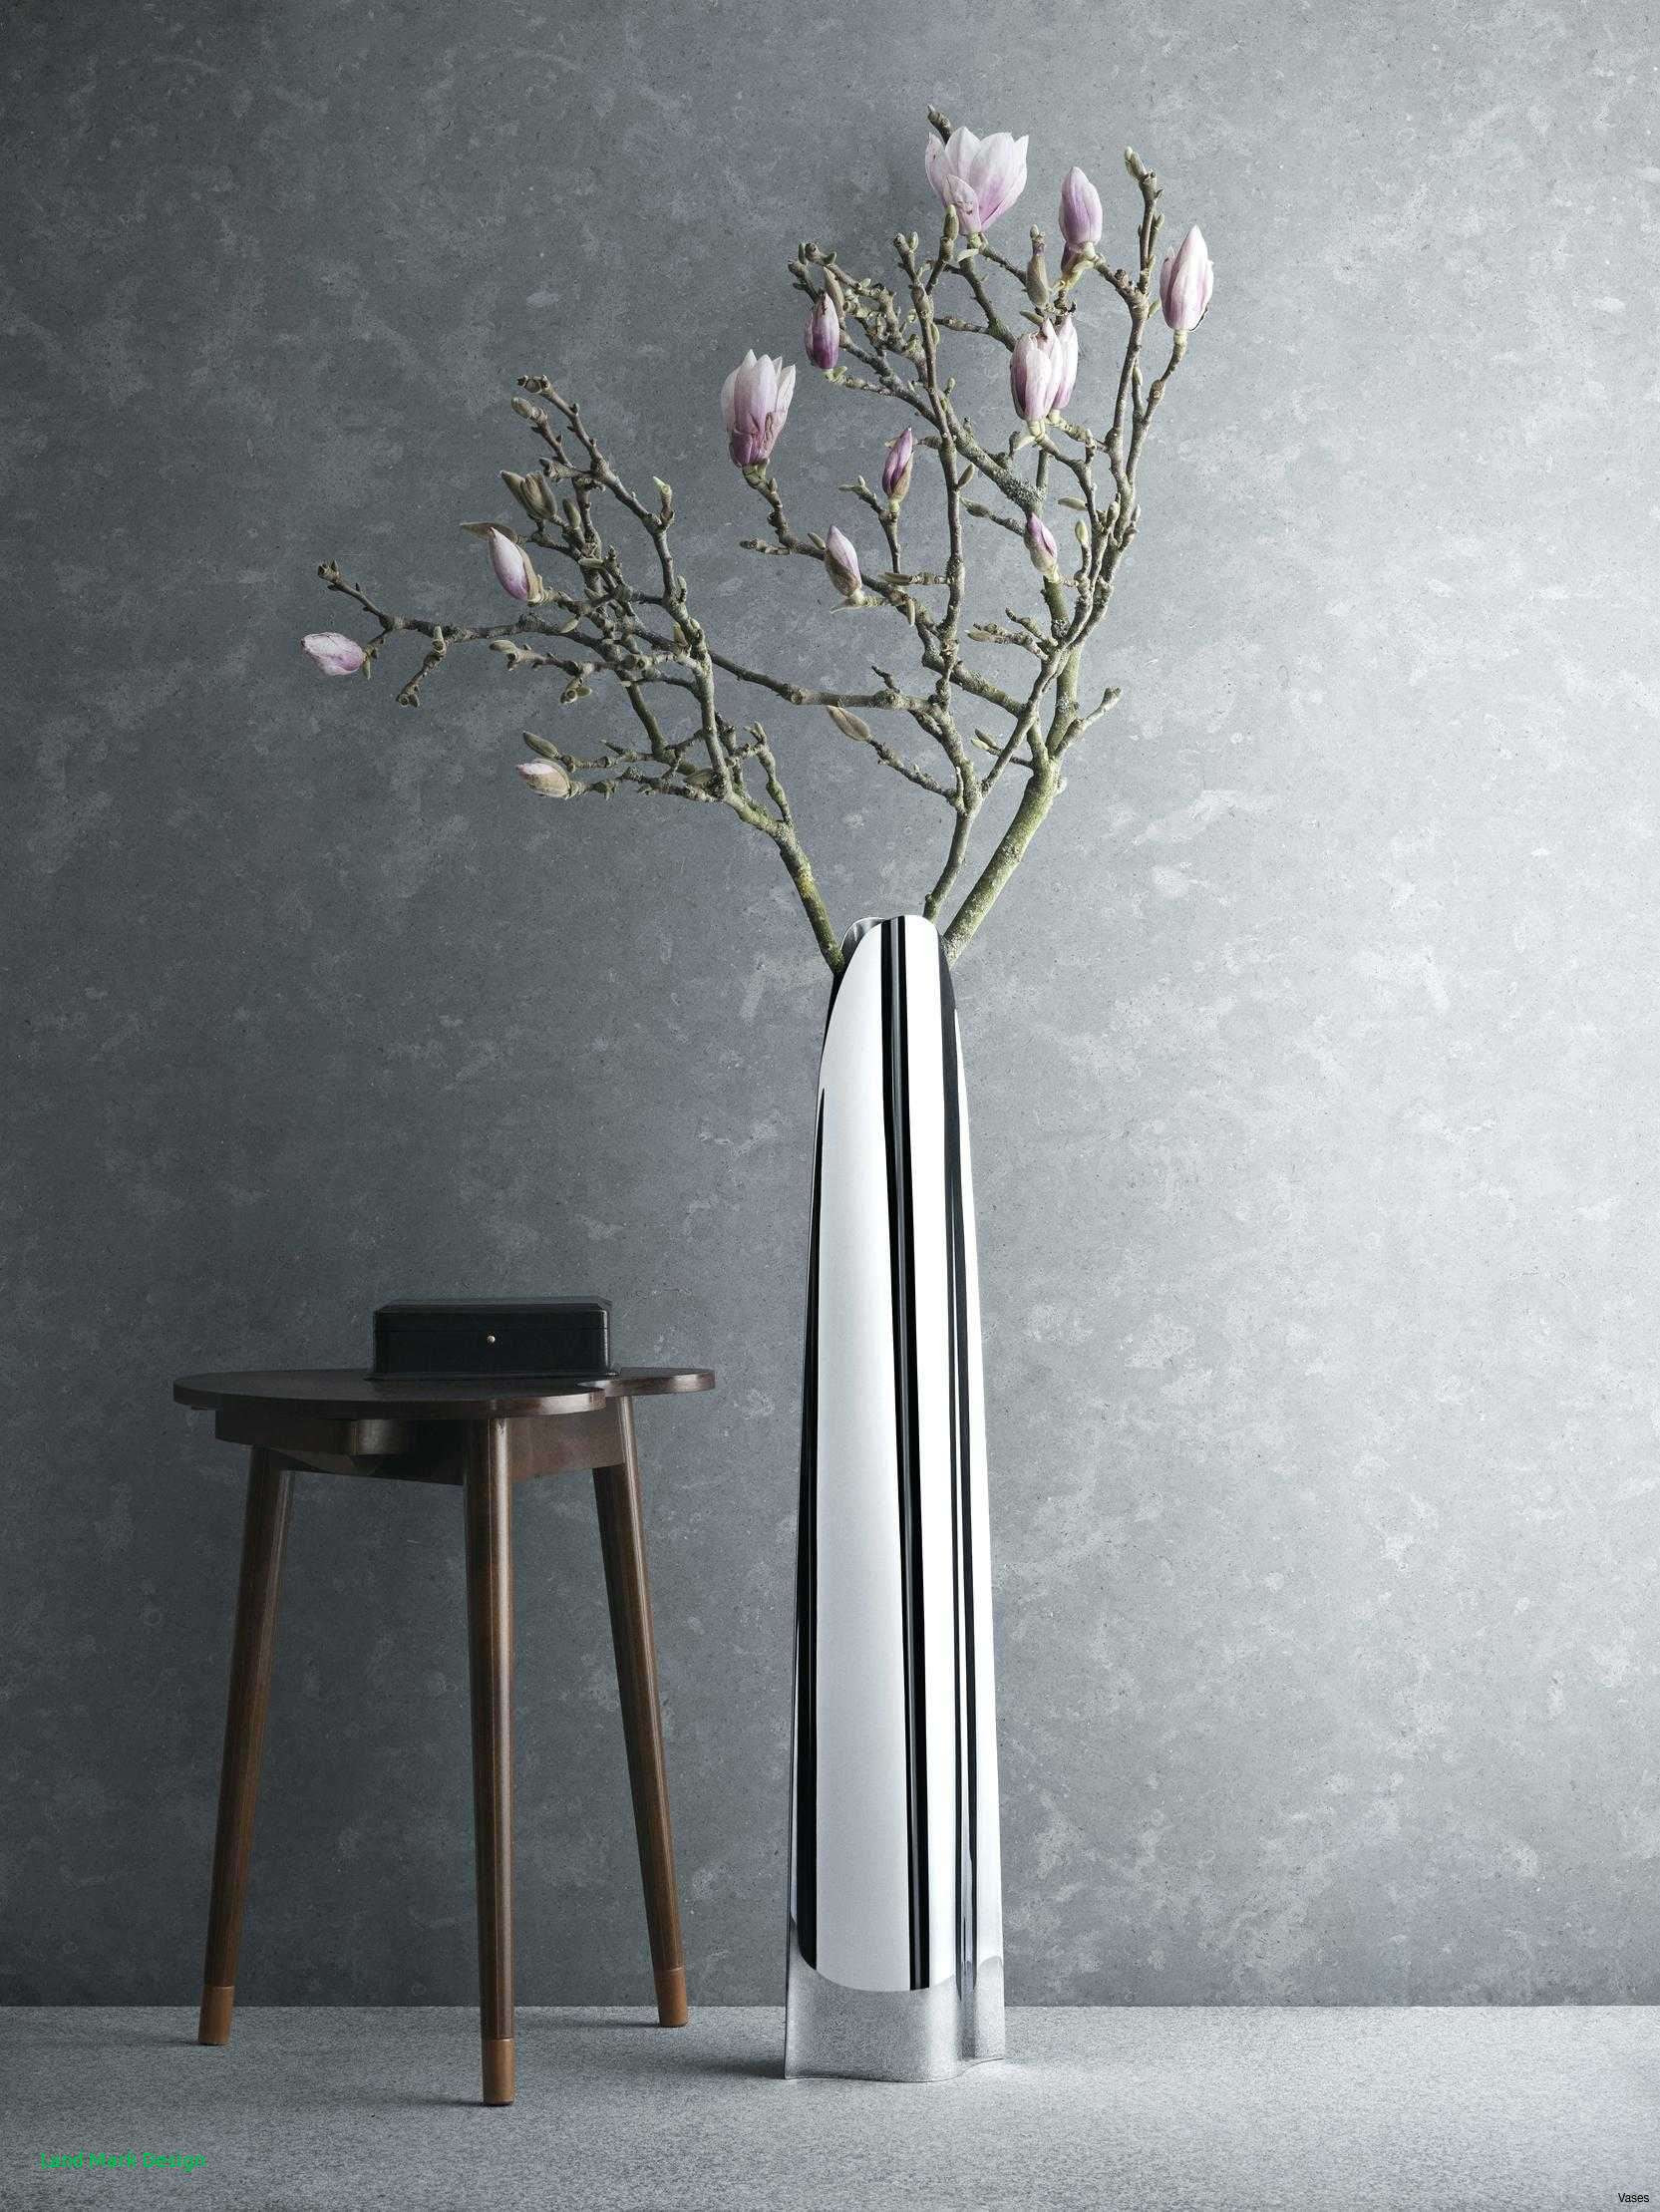 27 Lovable Long Branches for Vases 2024 free download long branches for vases of floor vase branches images 30 new decorative sticks for vases with floor vase branches image tall vase with branches design of floor vase branches images 30 new